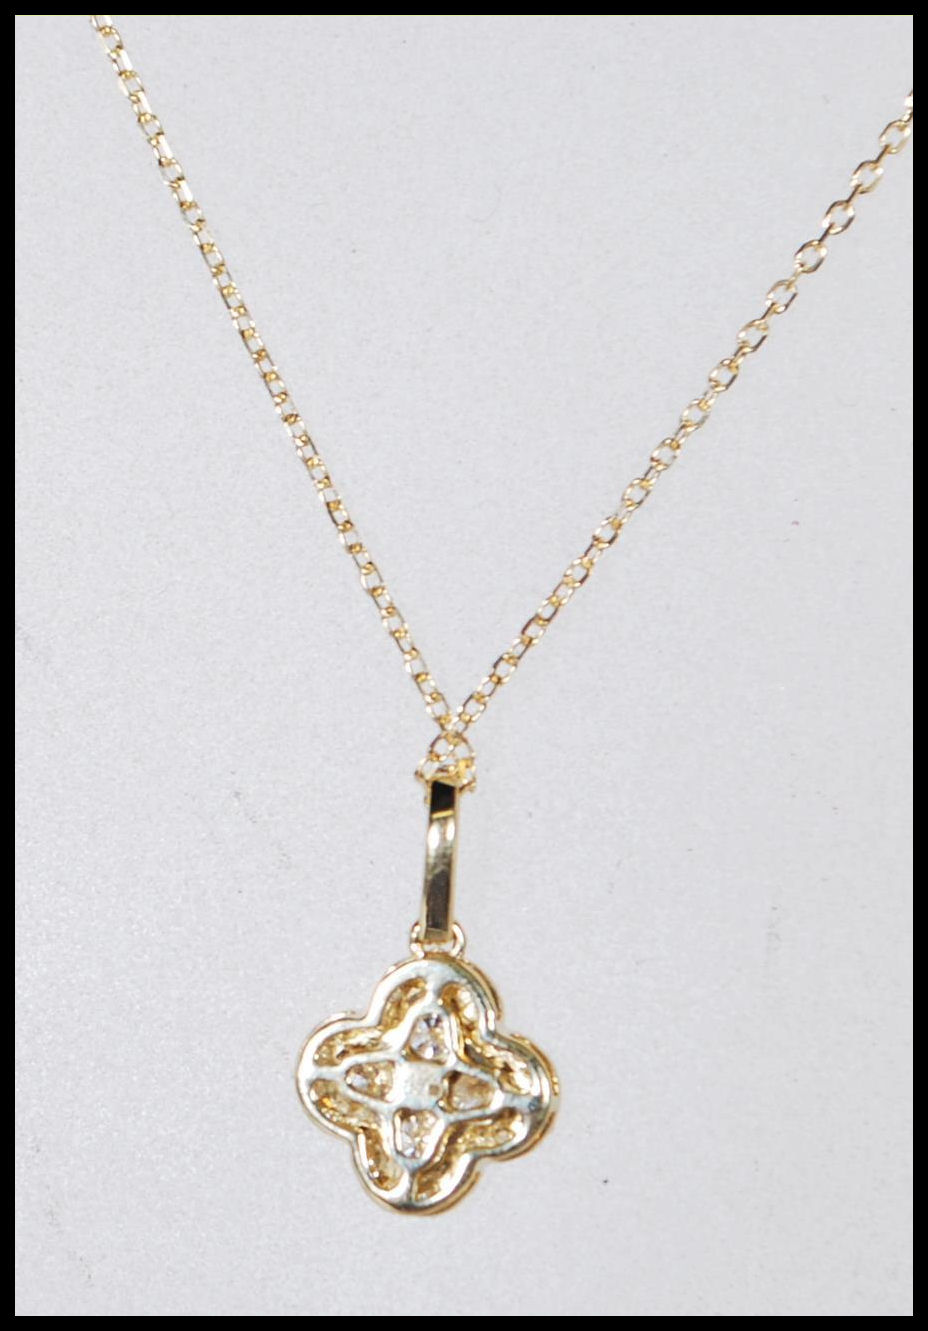 A hallmarked 18ct yellow gold necklace having a pendant in the form of a four leaf clover set with - Image 5 of 6